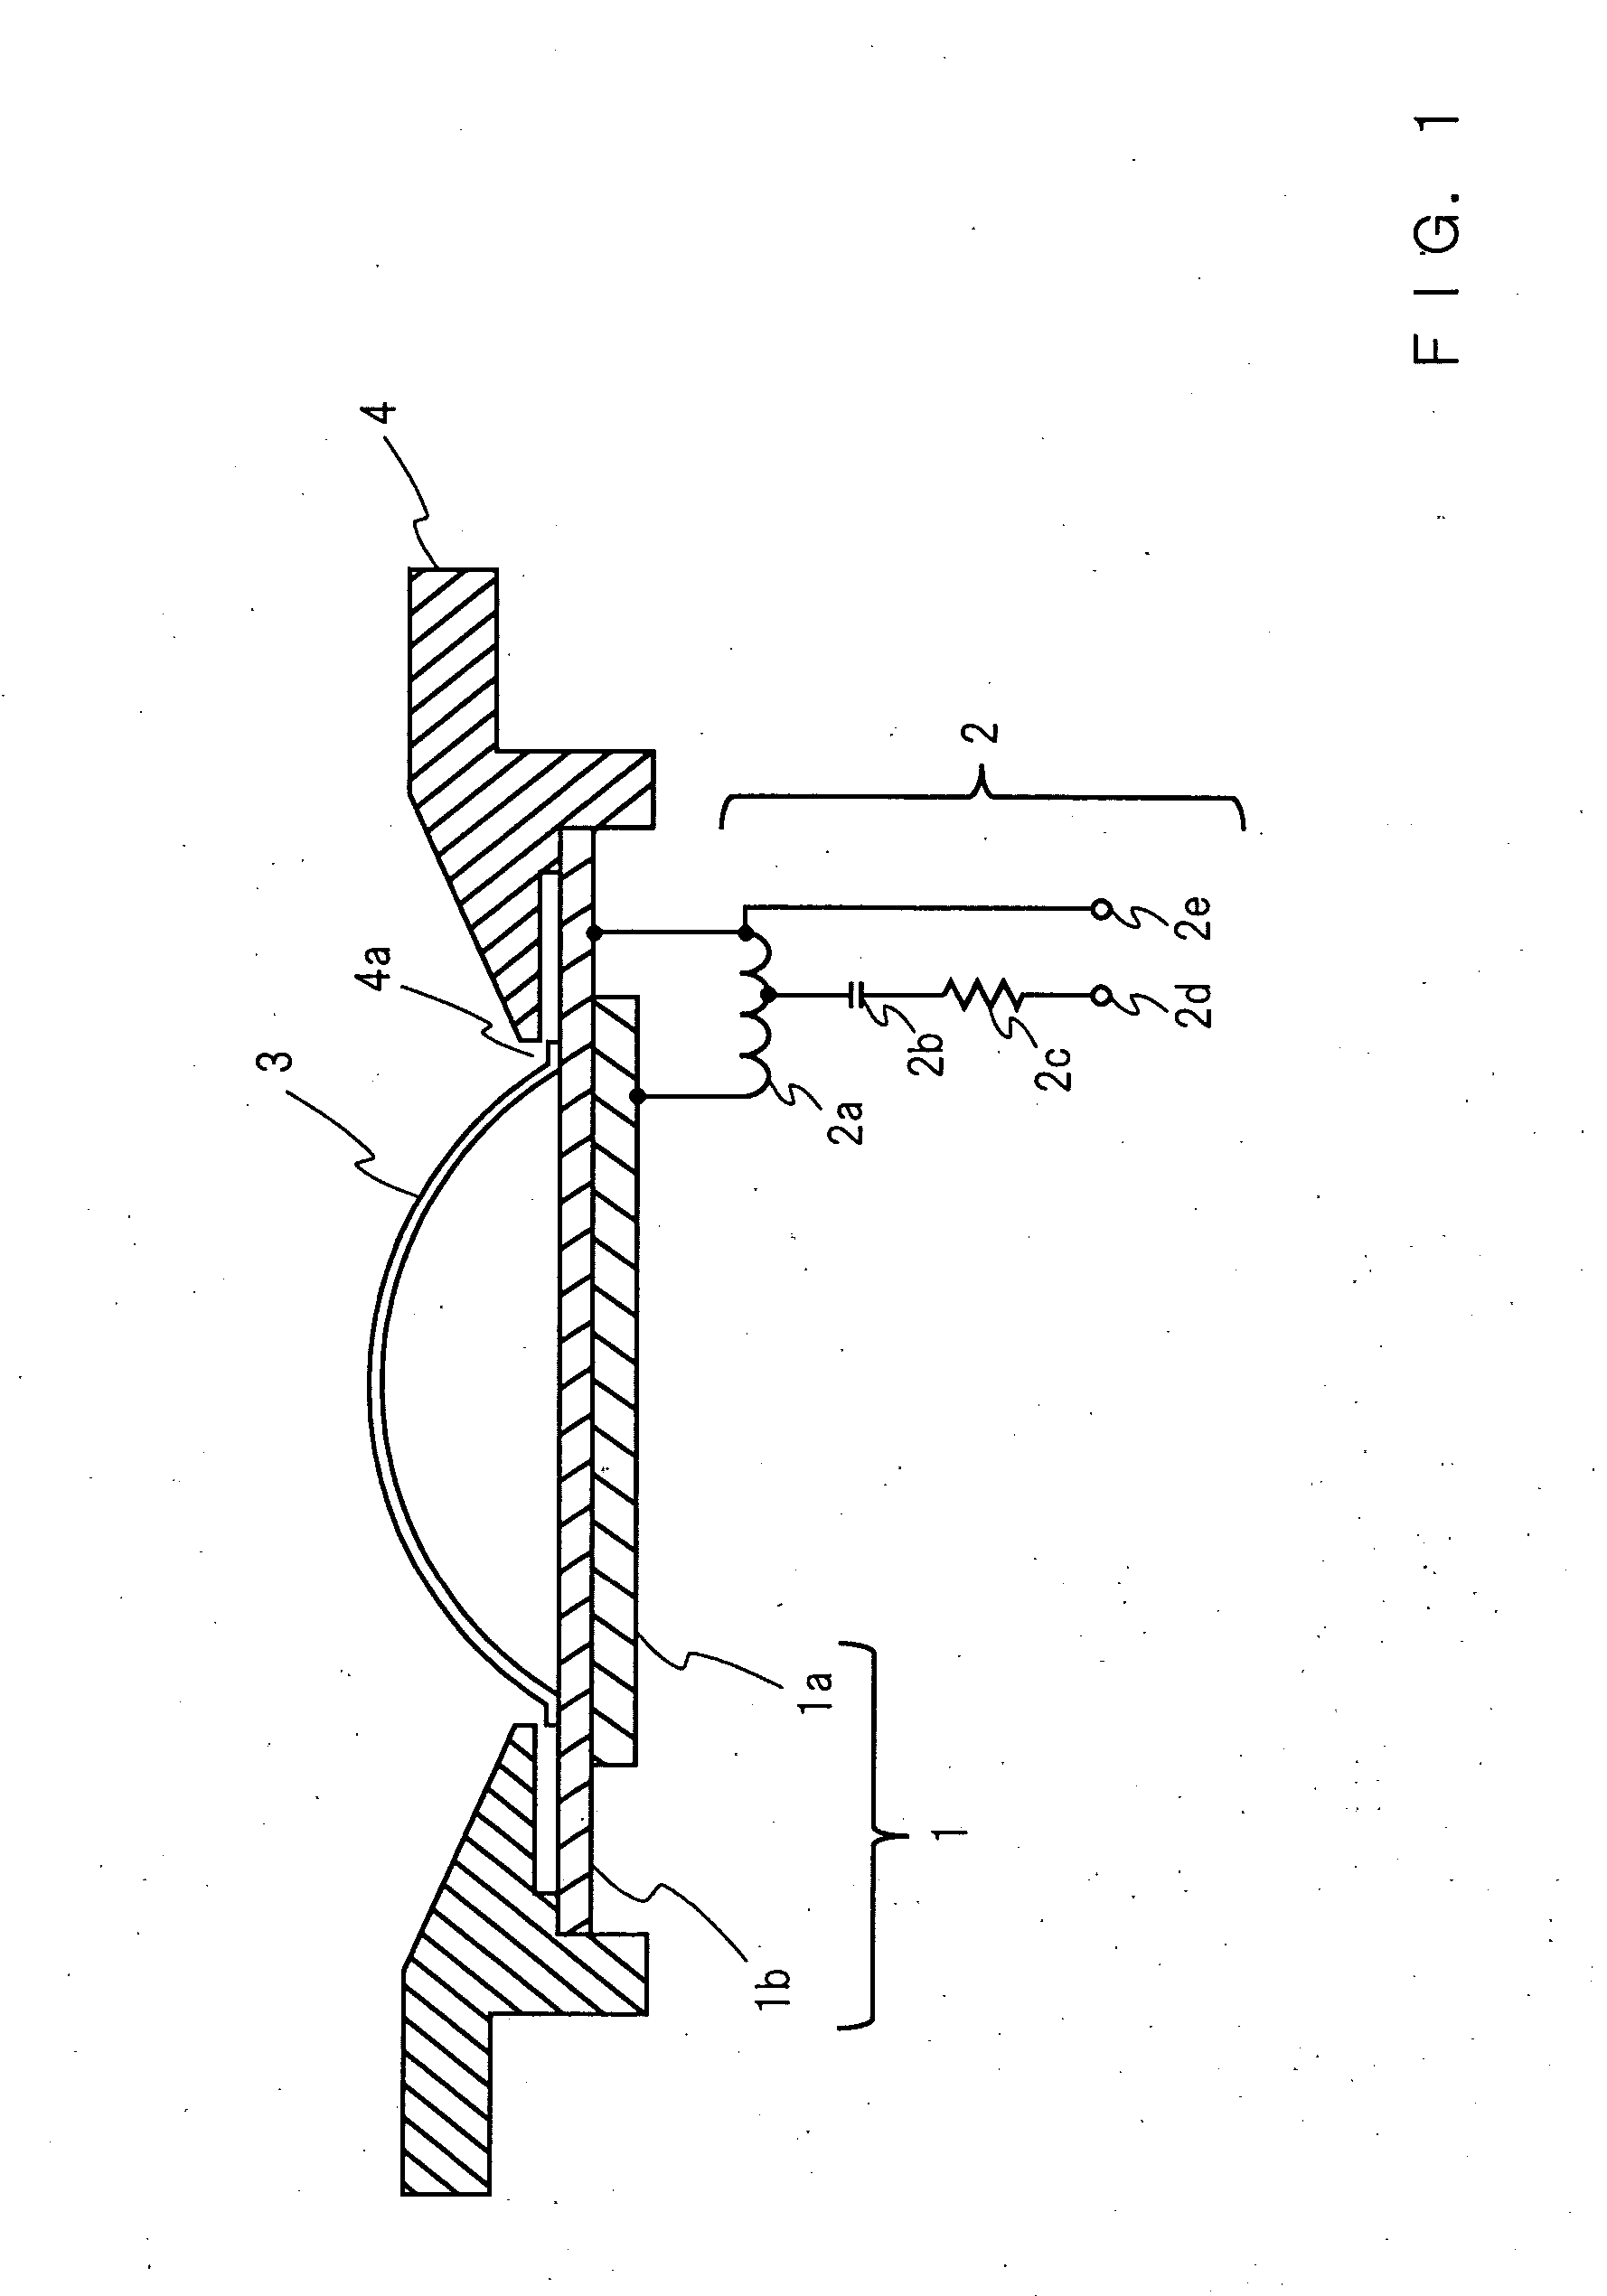 Speaker for super-high frequency range reproduction